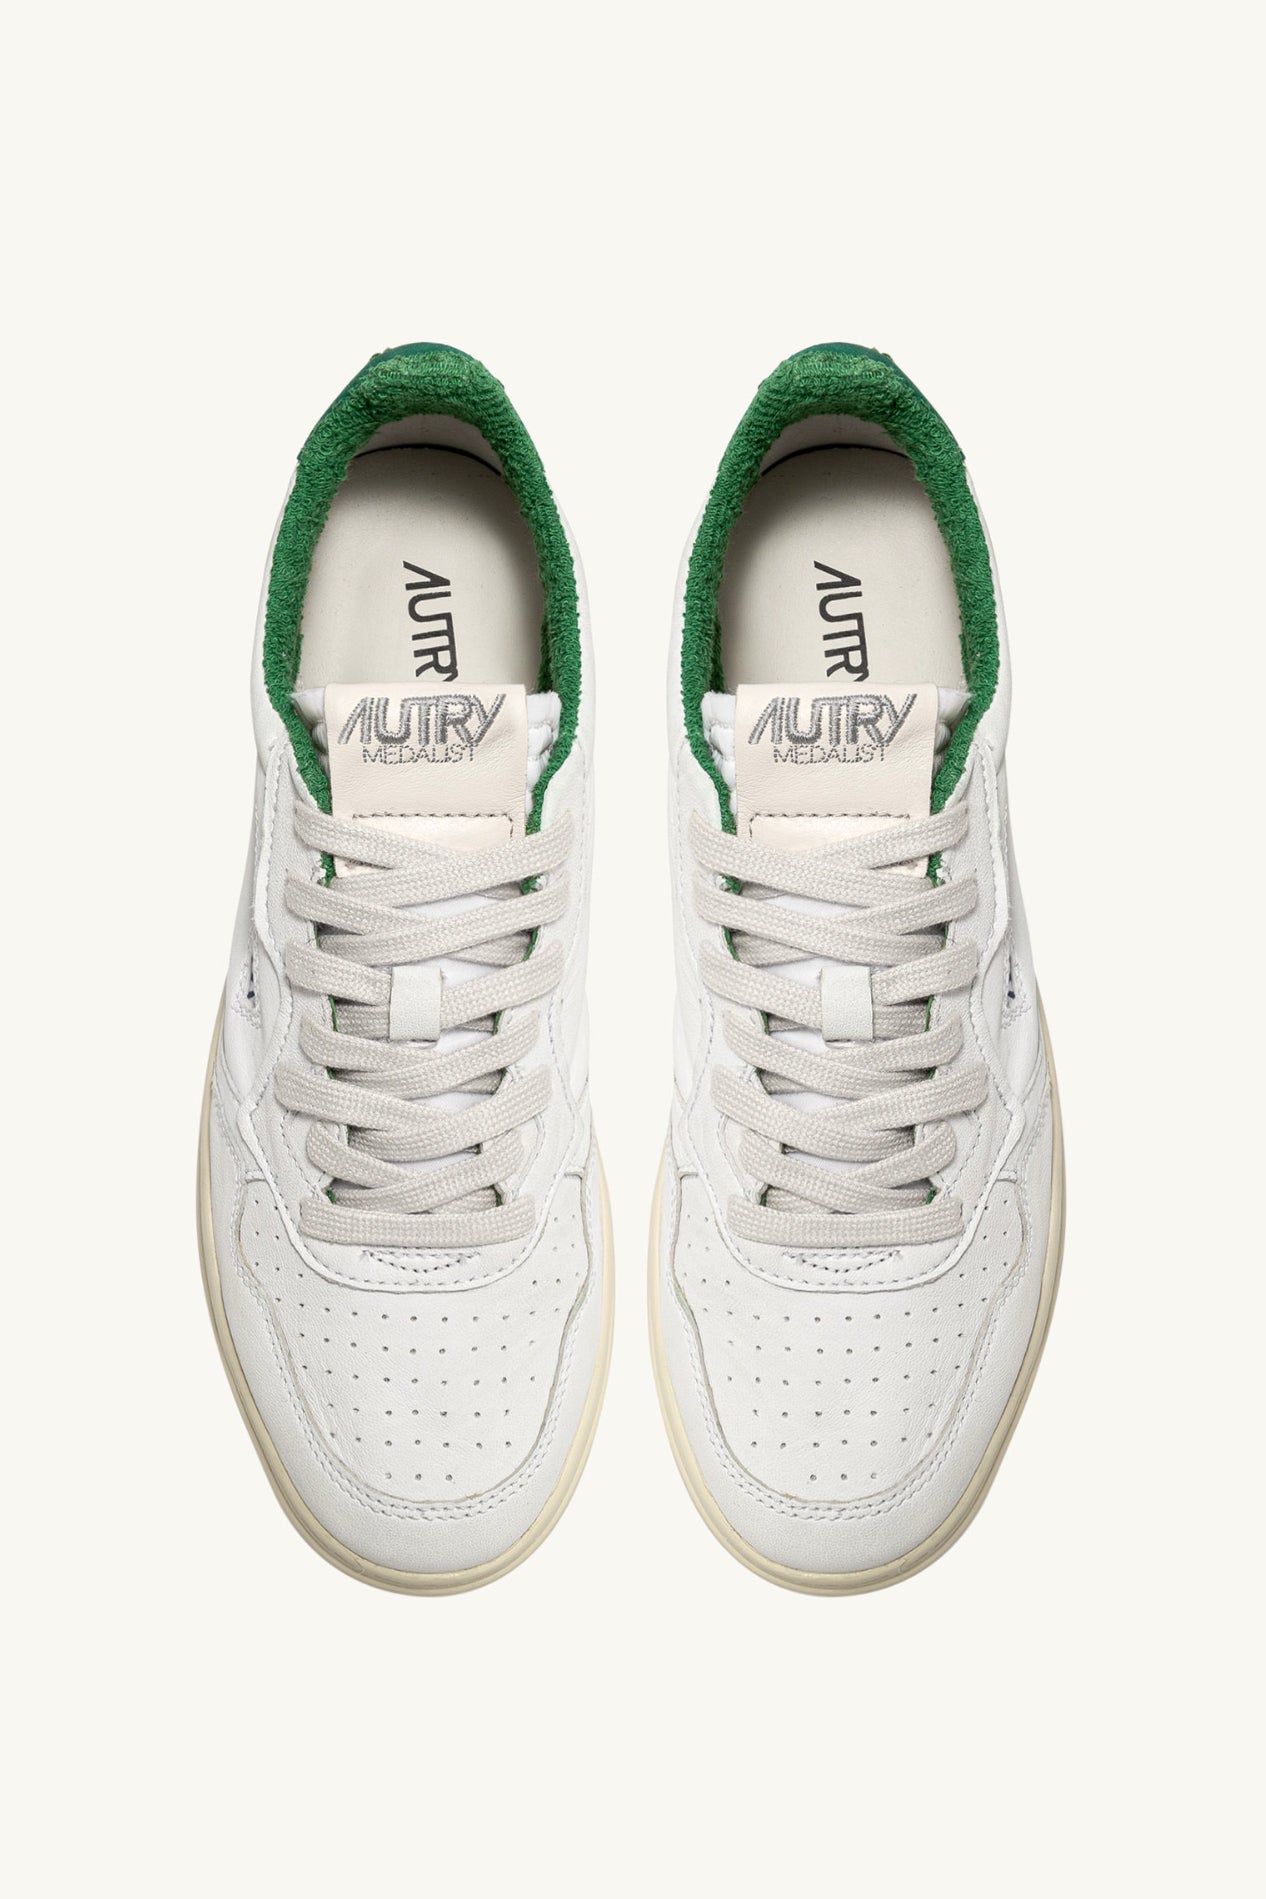 Medalist low-top leather sneakers, green back